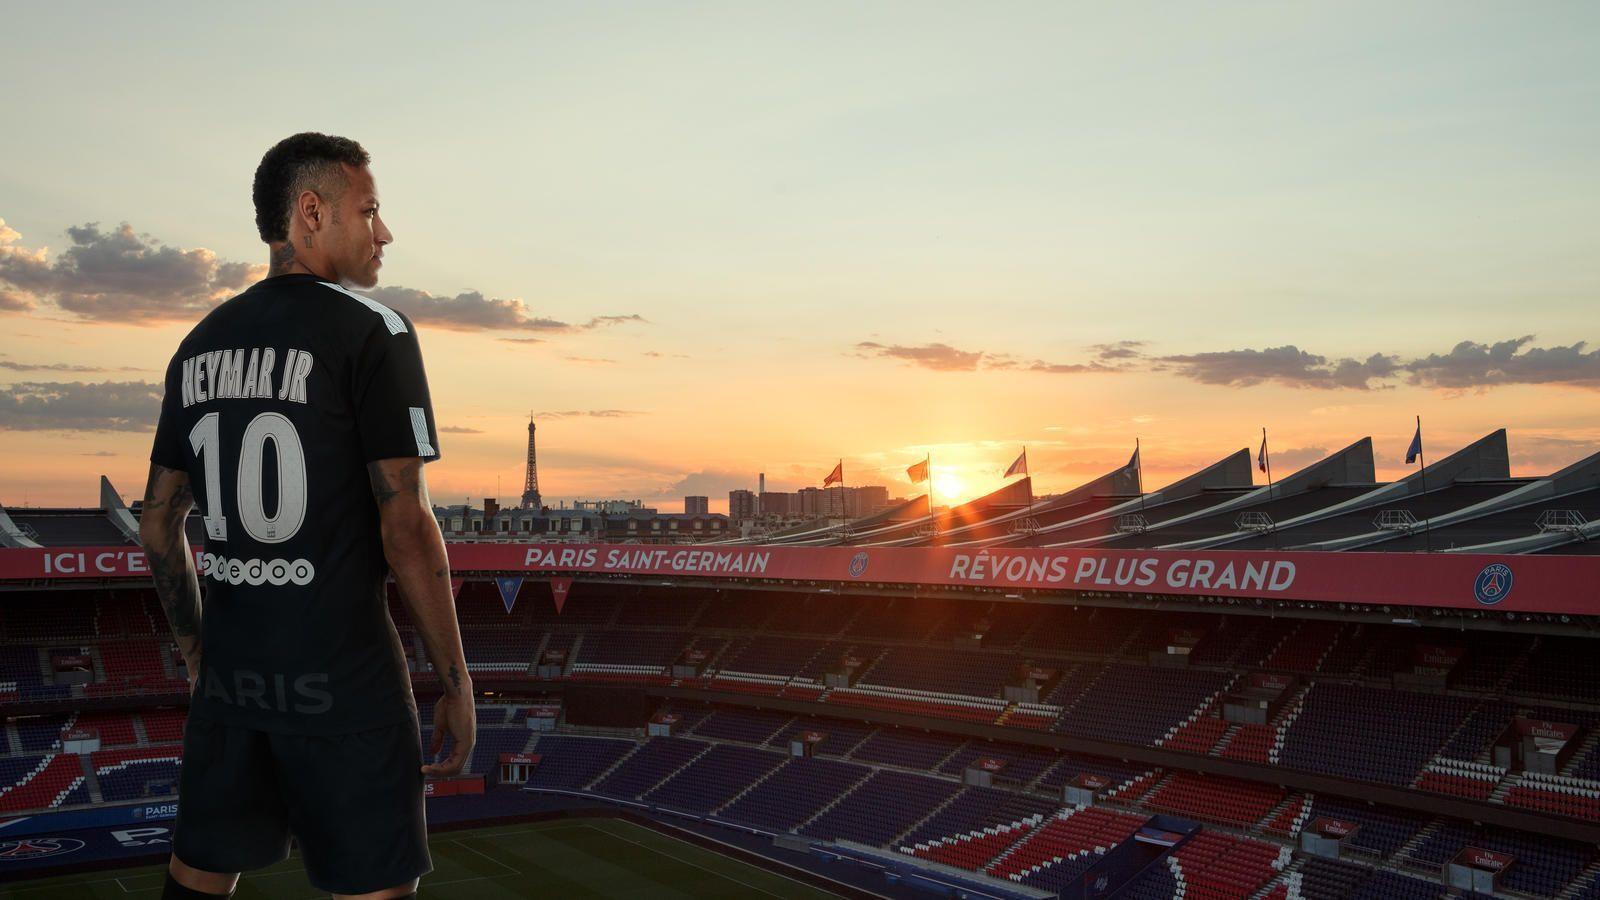 Neymar, Kylian Mbappe feature prominently as PSG unveil third kit